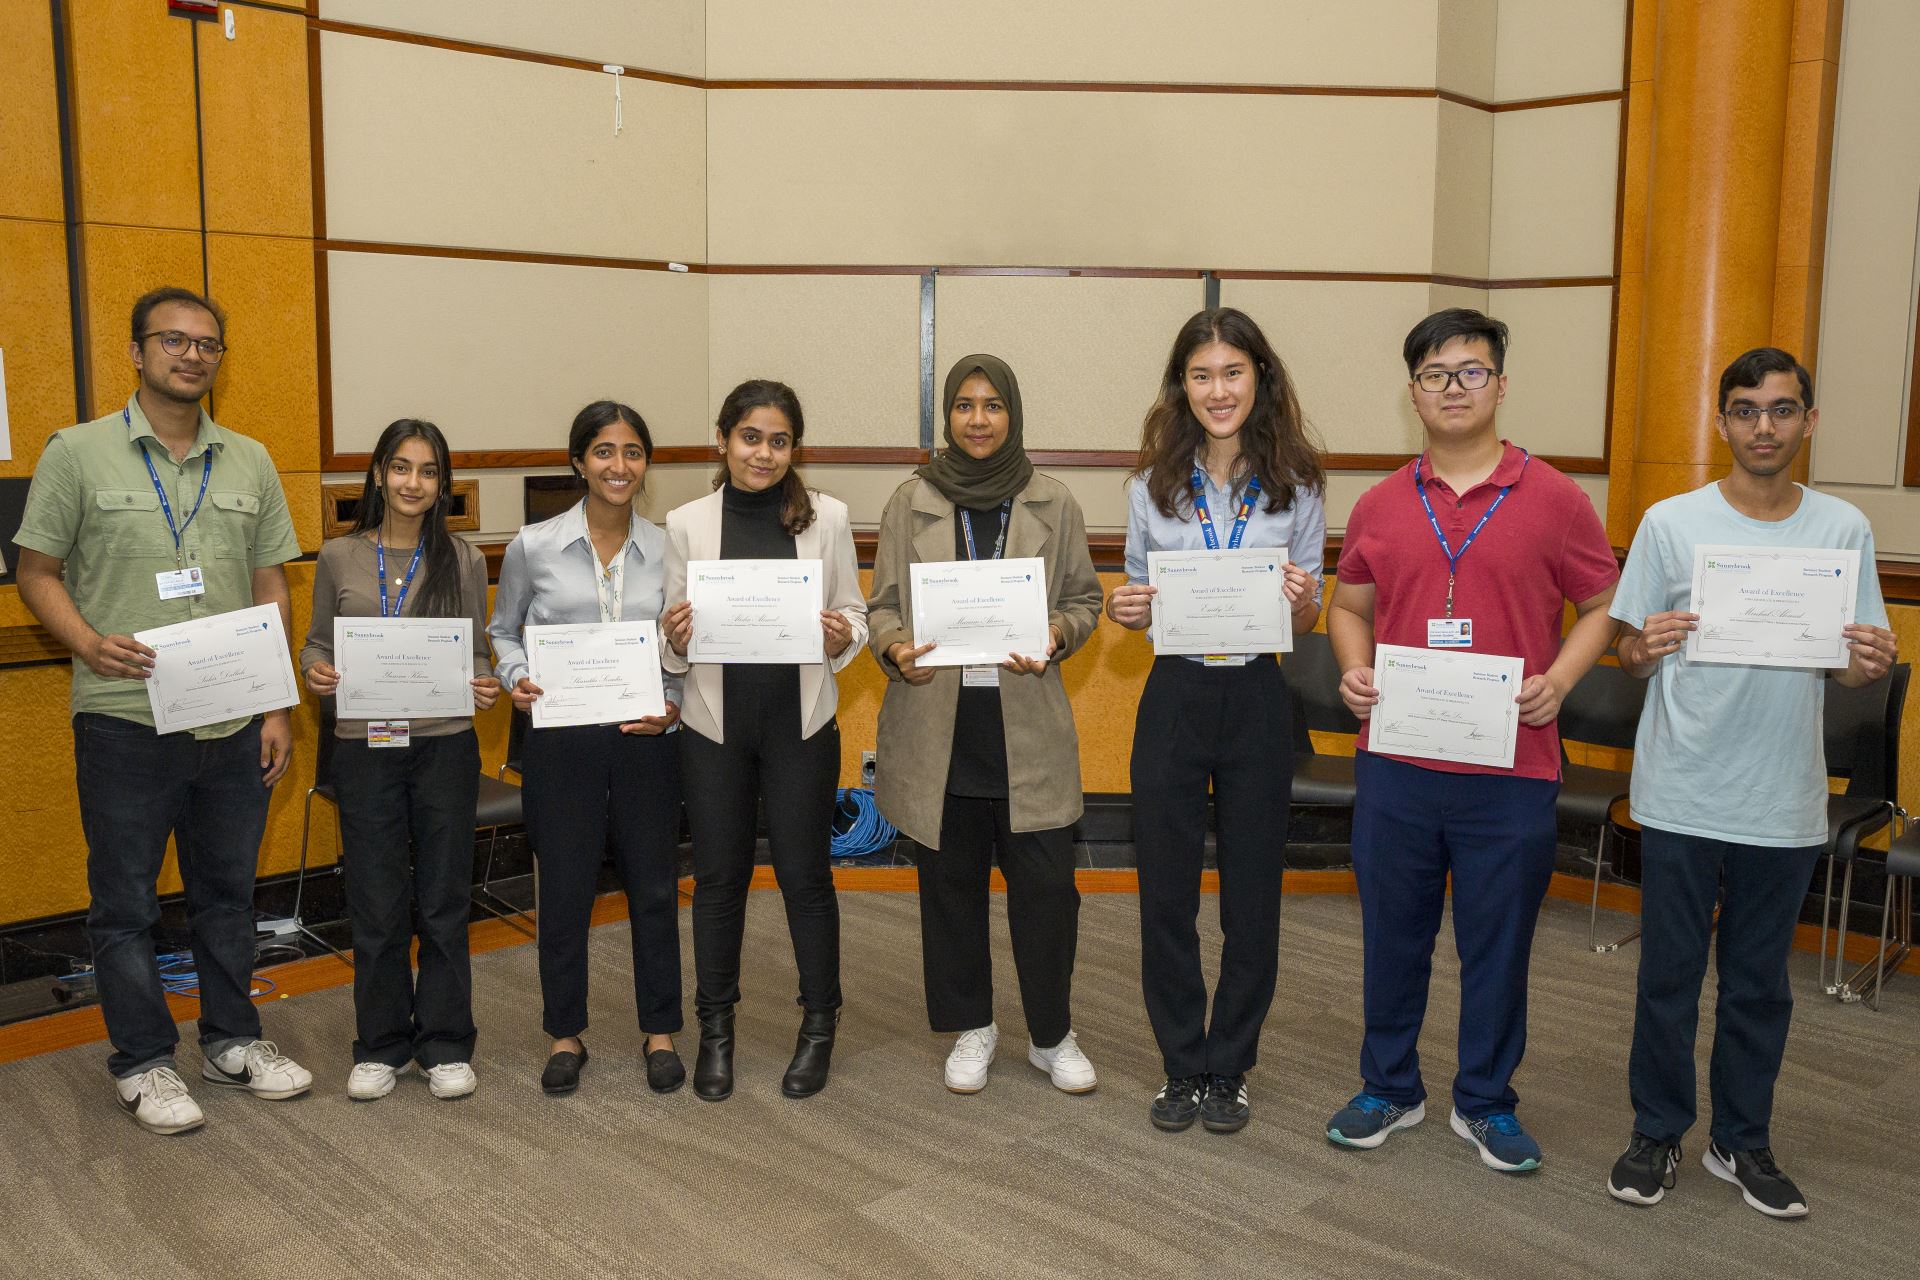 Winners of the Sunnybrook Research Institute Summer Student poster competition